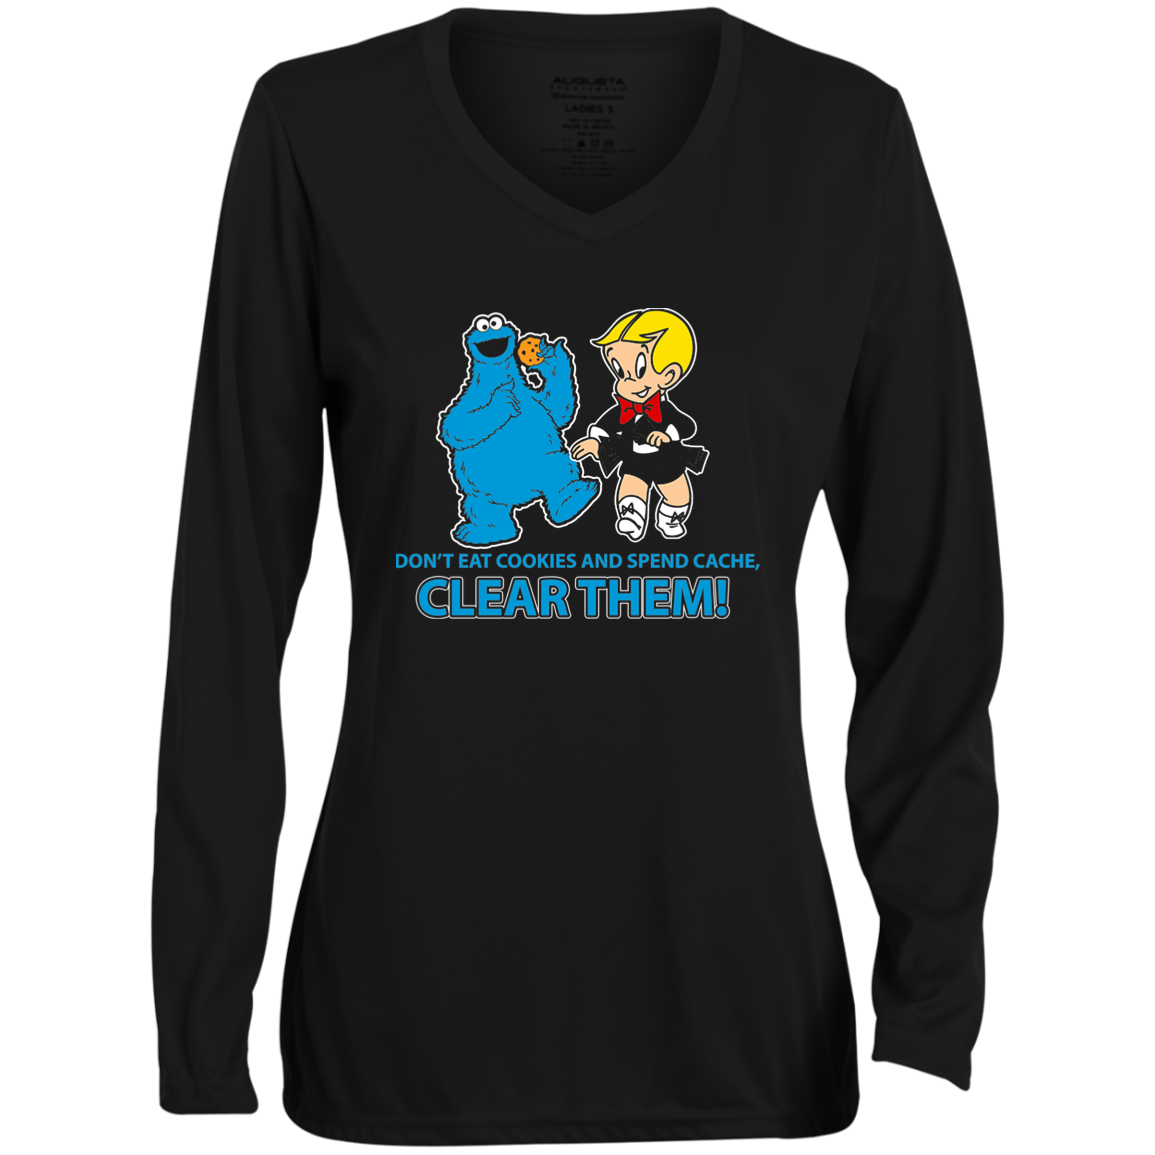 ArtichokeUSA Custom Design. Don't Eat Cookies And Spend Cache! Delete Them! Cookie Monster and Richie Rich Fan Art/Parody. Ladies' Moisture-Wicking Long Sleeve V-Neck Tee